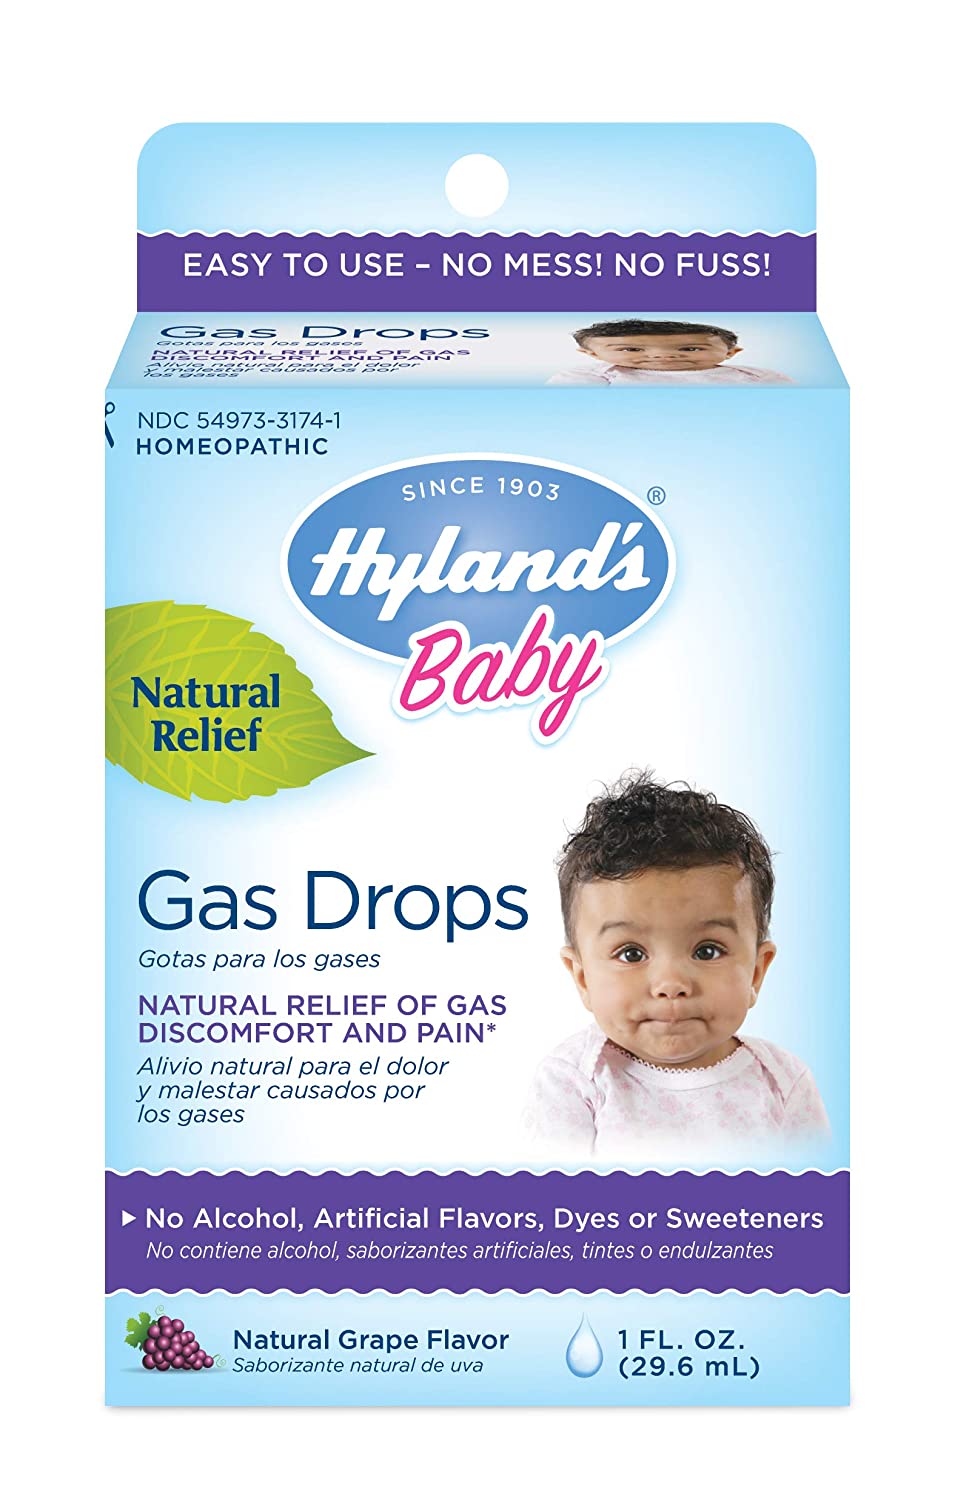 Top 7 Best Infant Gas Drops Reviews In 2021